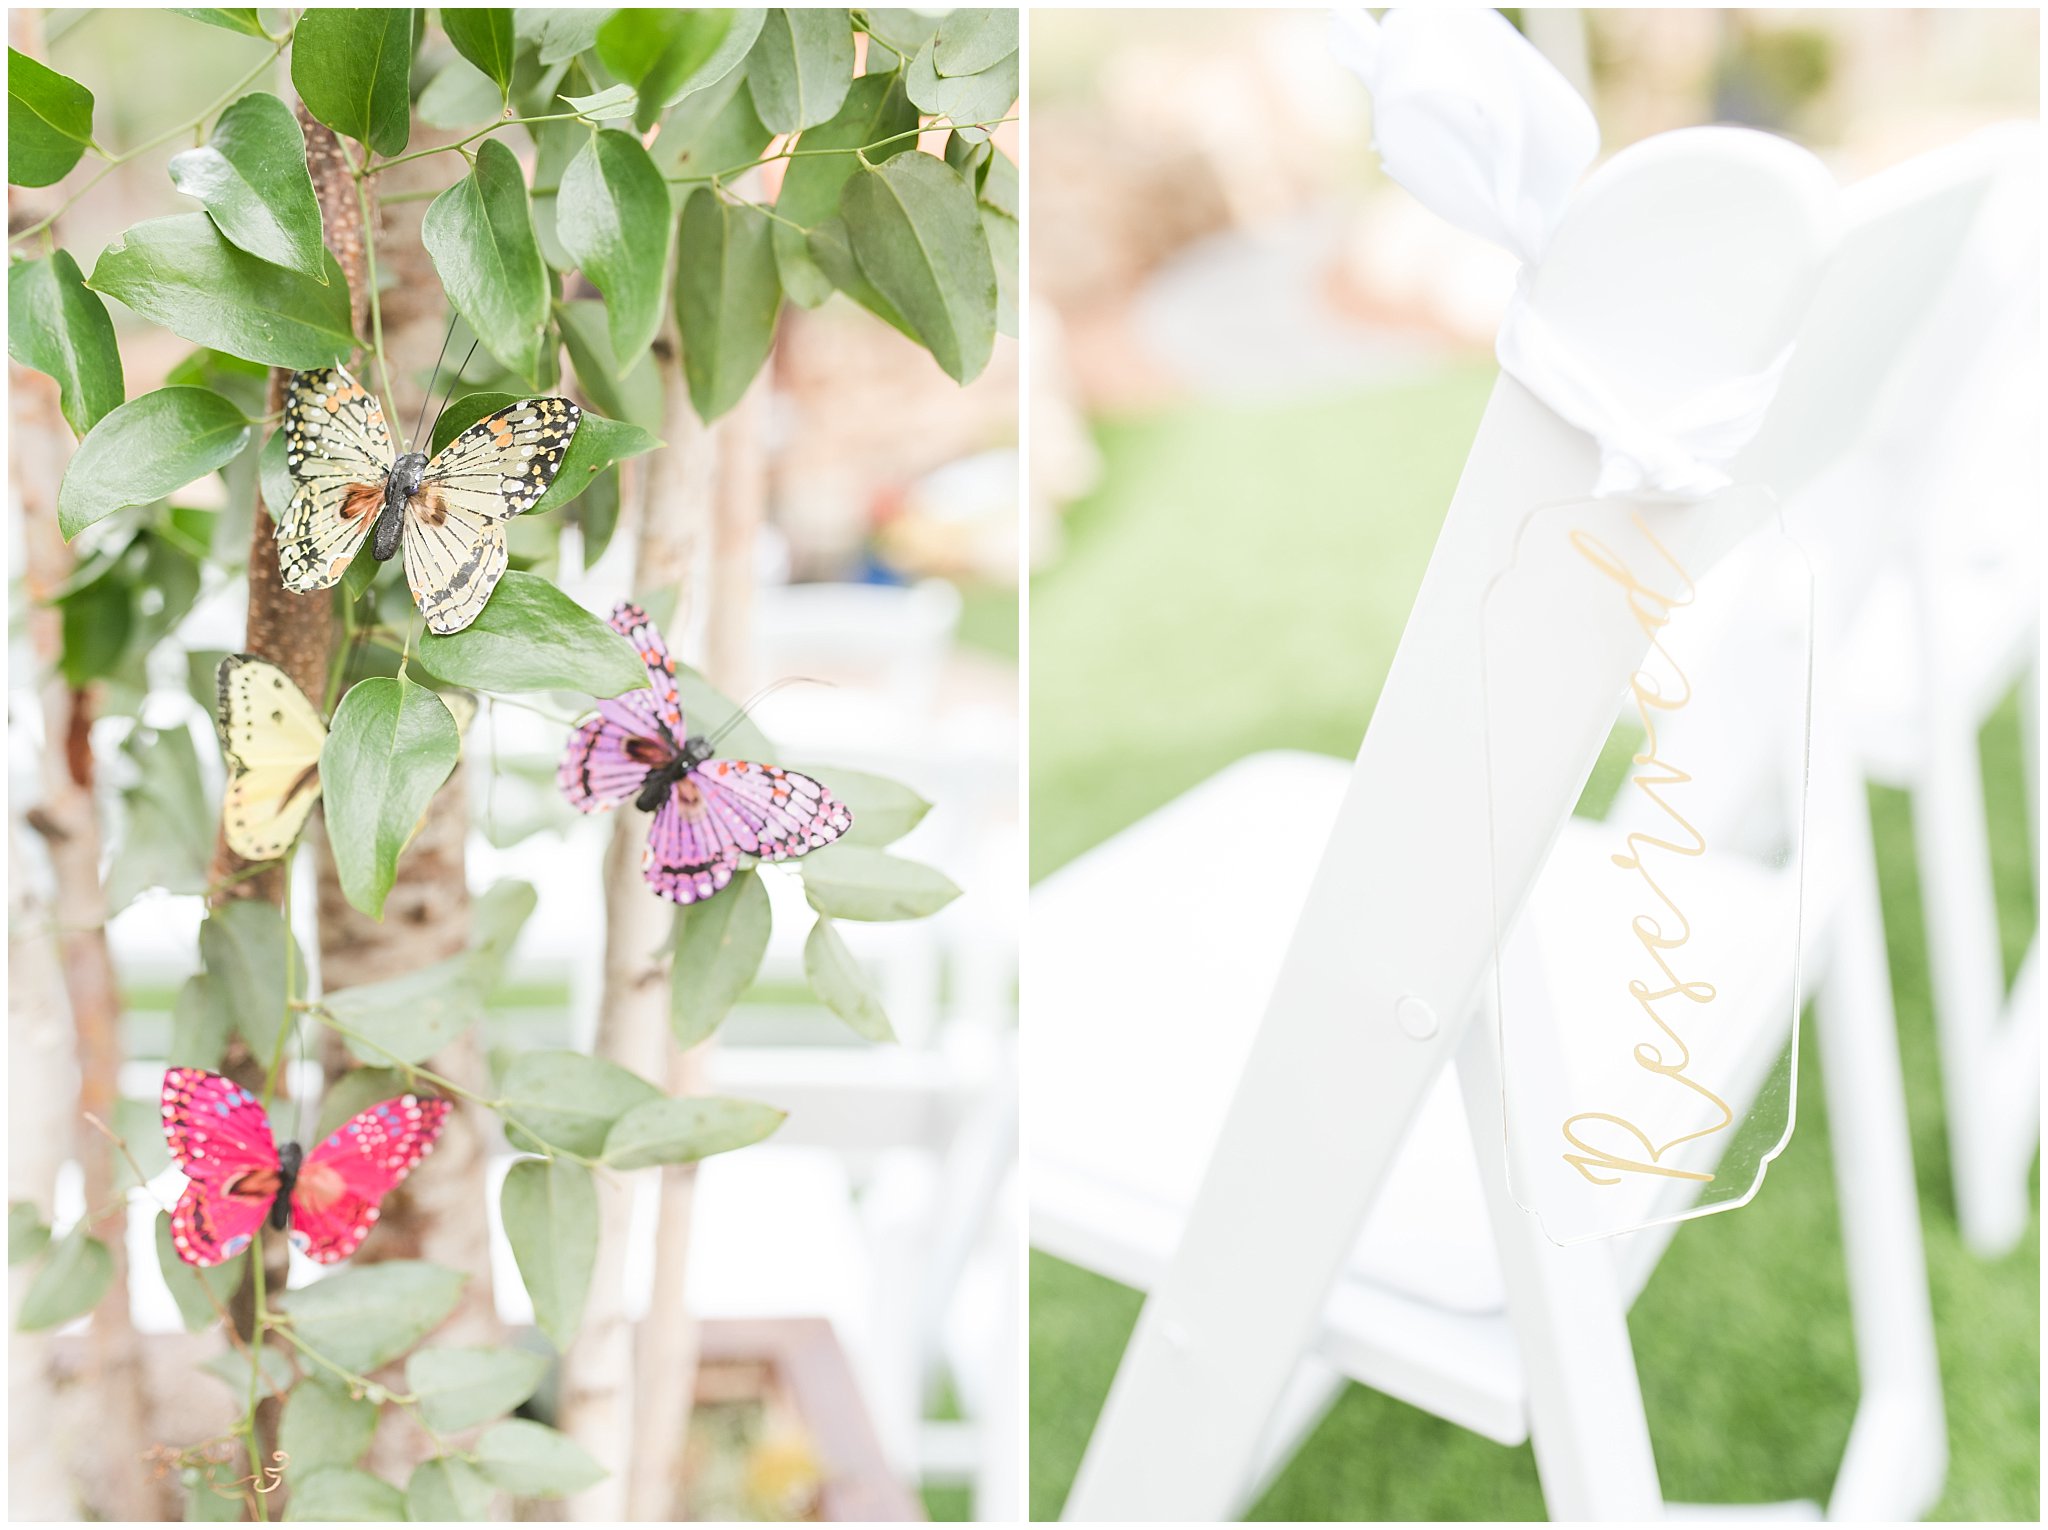 Ceremony site decoration and setup with butterflies, aspen trees and floral circle arch | Park City Wedding at the Hyatt Centric | Jessie and Dallin Photography